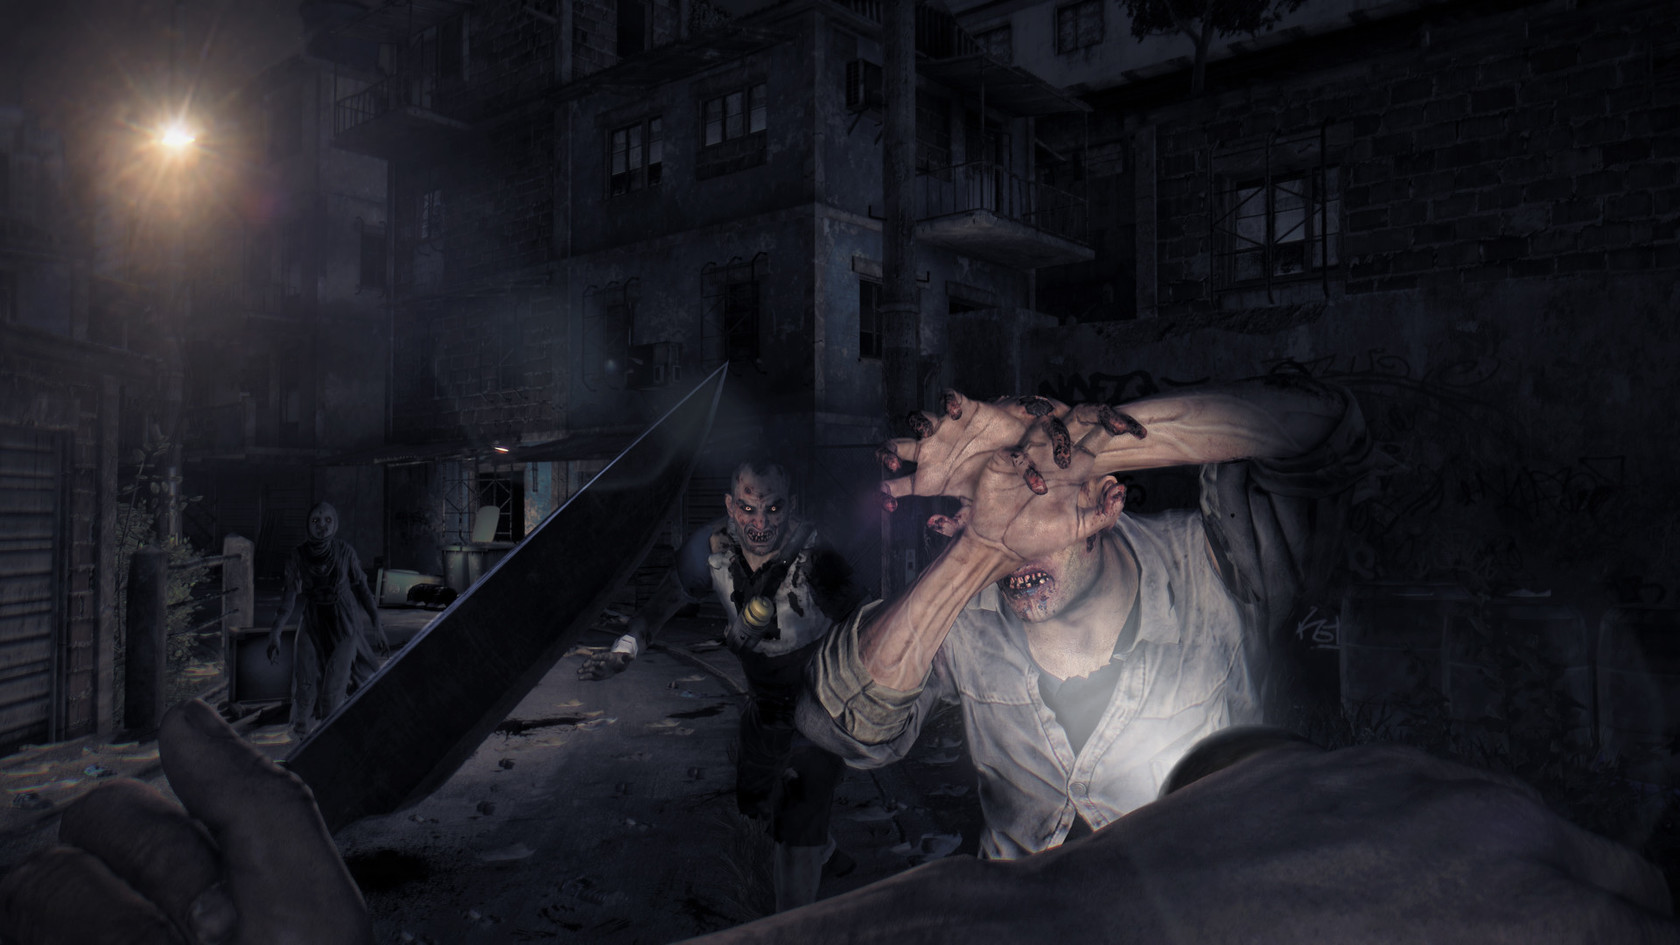 Dying Light: The Following - Enhanced Edition (Simplified Chinese, English,  Traditional Chinese)